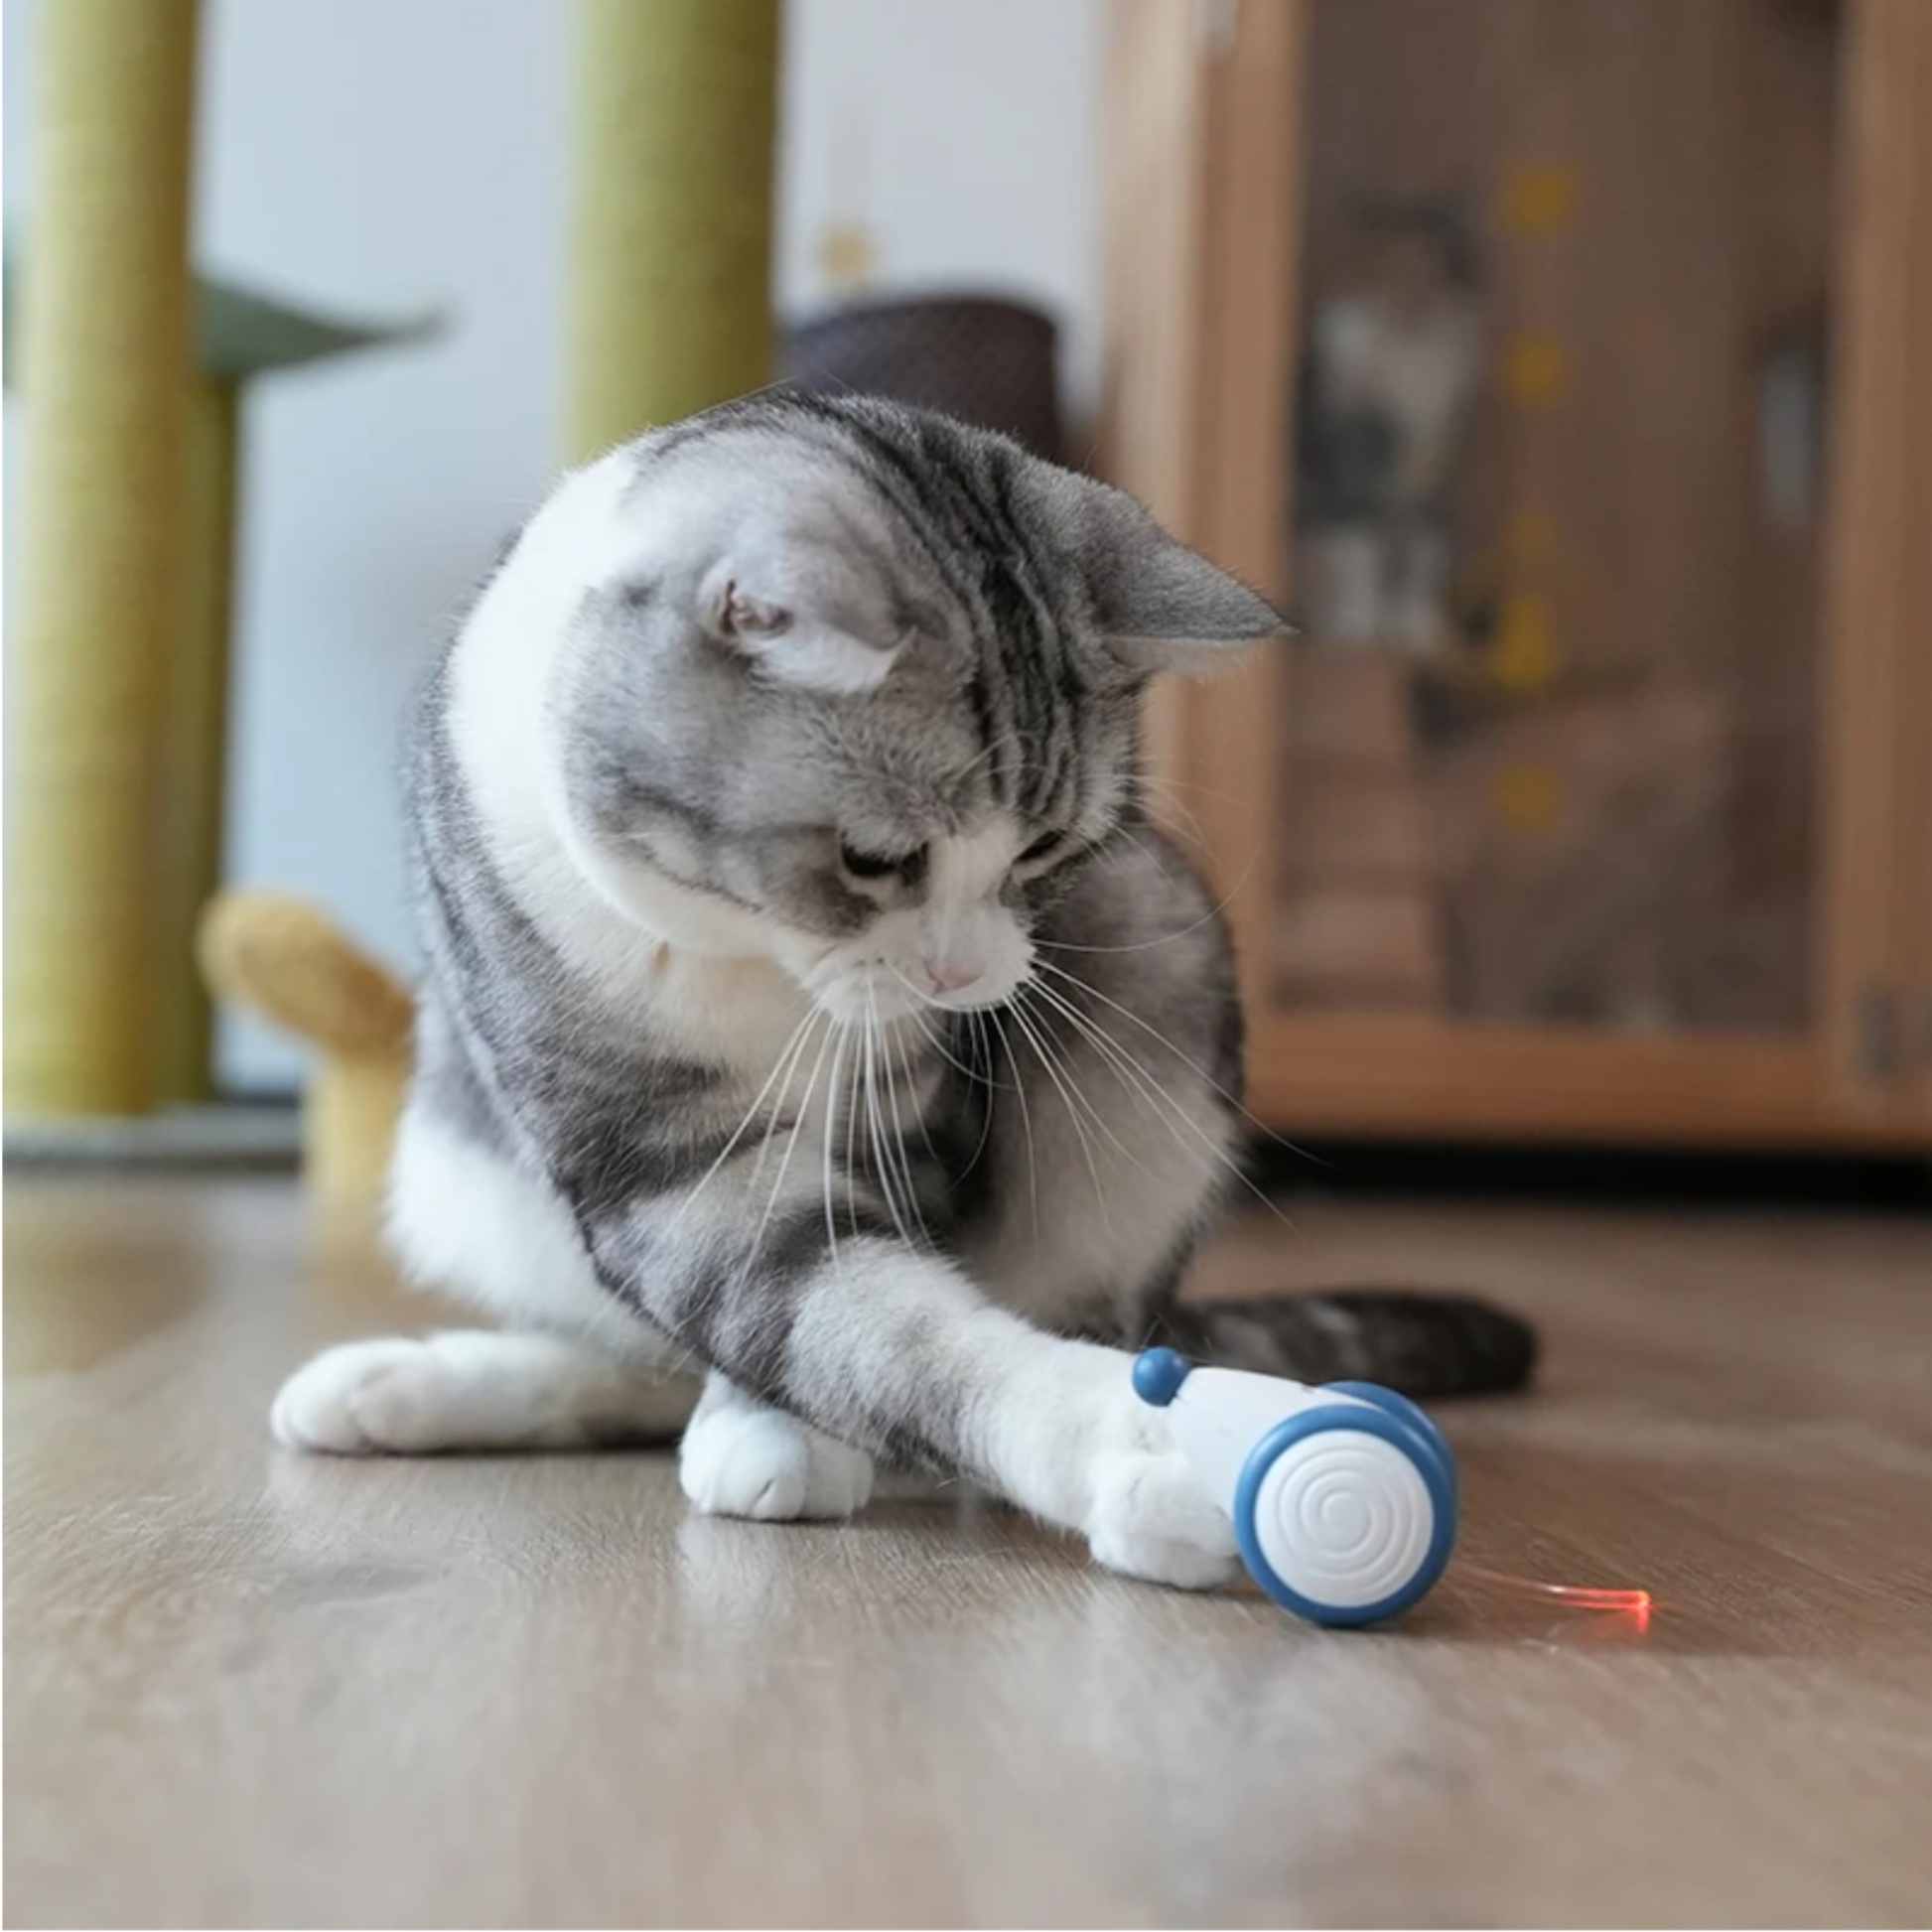 Wicked Mouse: New Smart Bionic Mouse Interactive Cat Toy